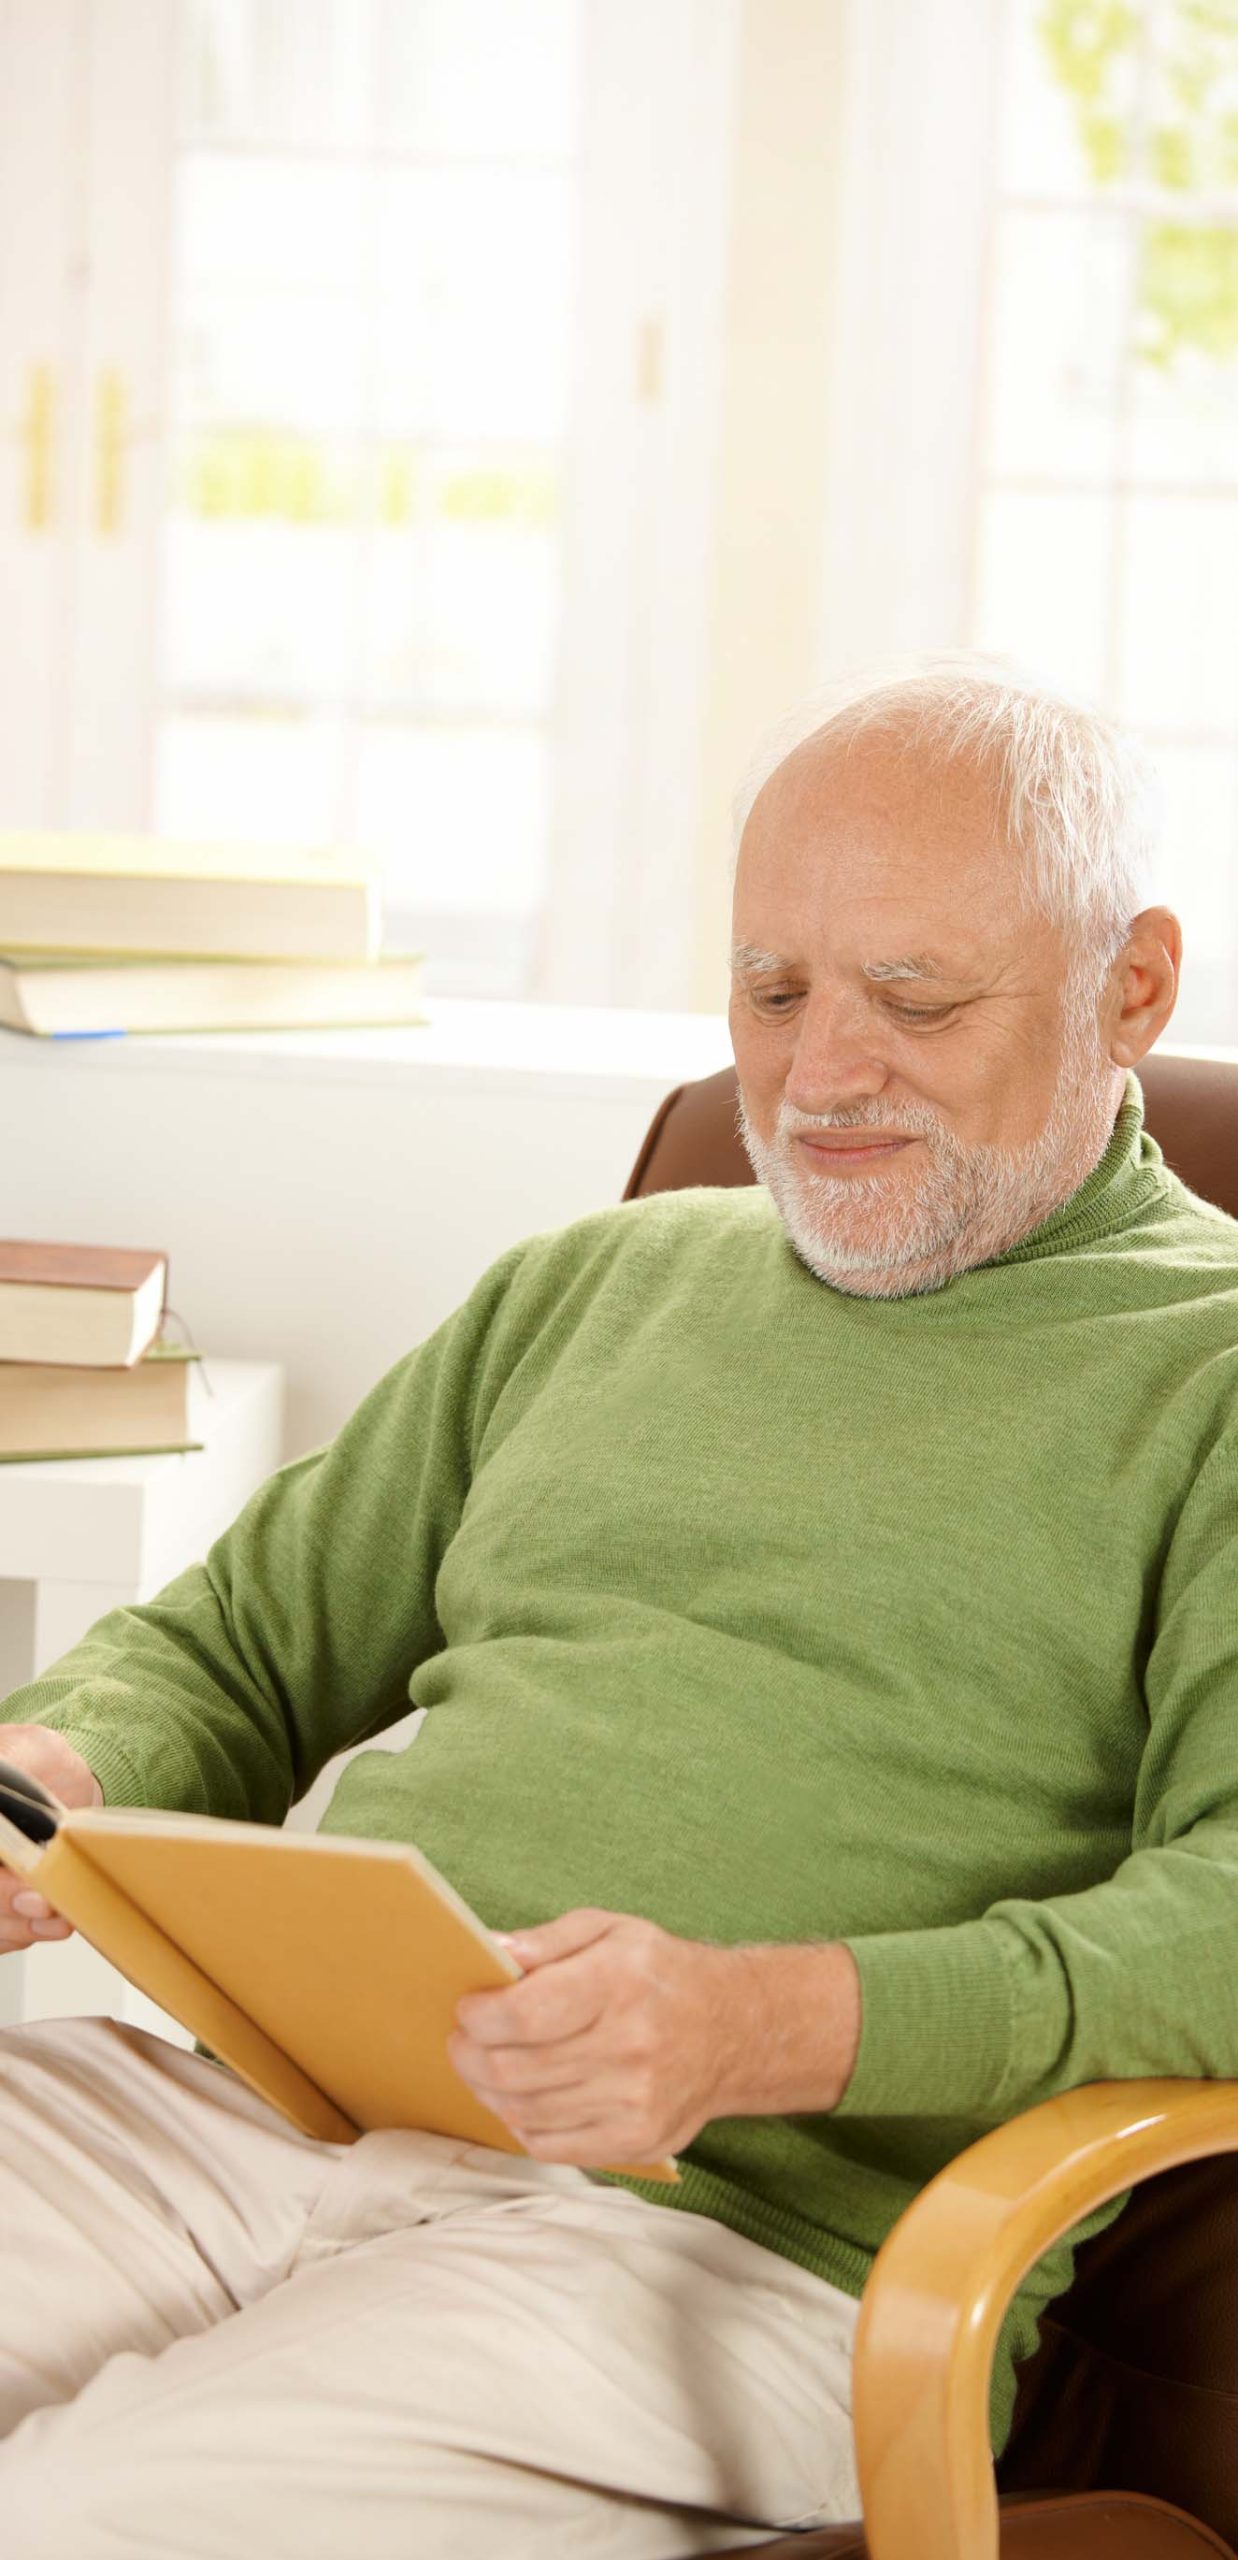 Older man sitting in armchair by window, relaxing at home, reading book, smiling.